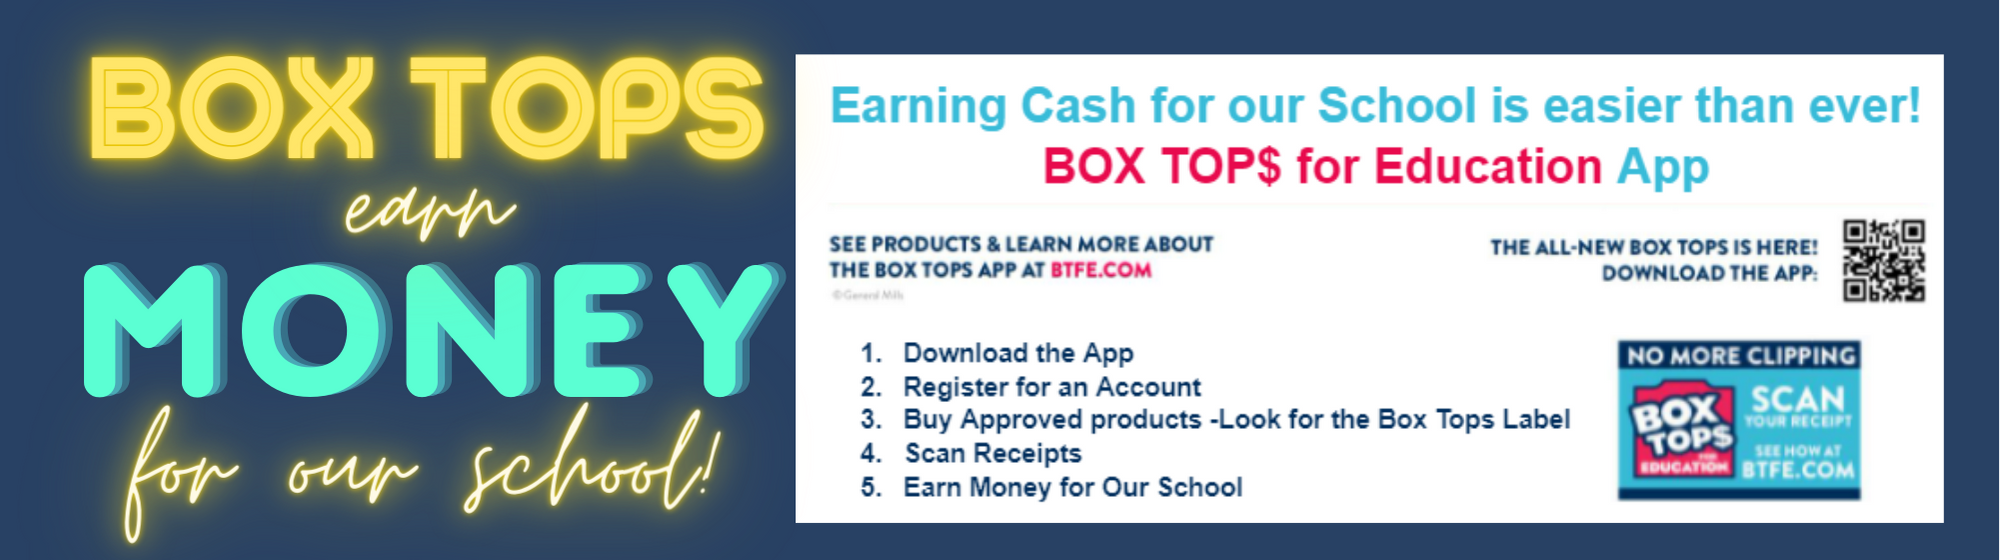 Box tops earn money for our school. Earning cash for our school is easier than ever with the box tops for education app. Download the app and follow the directions..